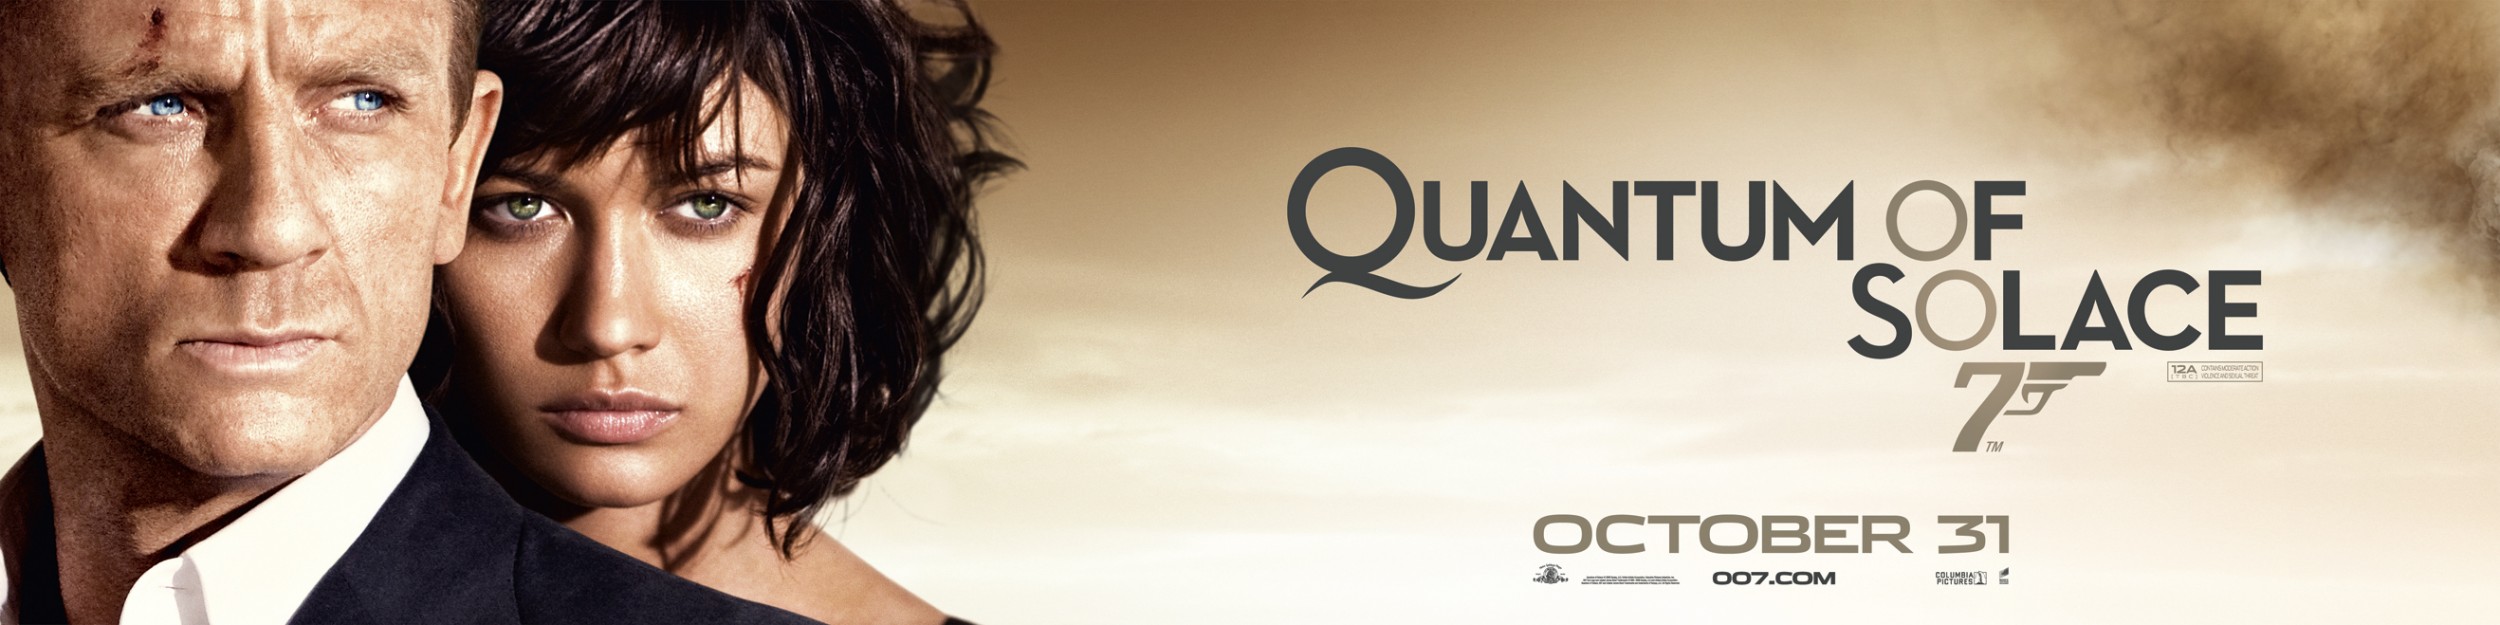 Mega Sized Movie Poster Image for Quantum of Solace (#11 of 11)